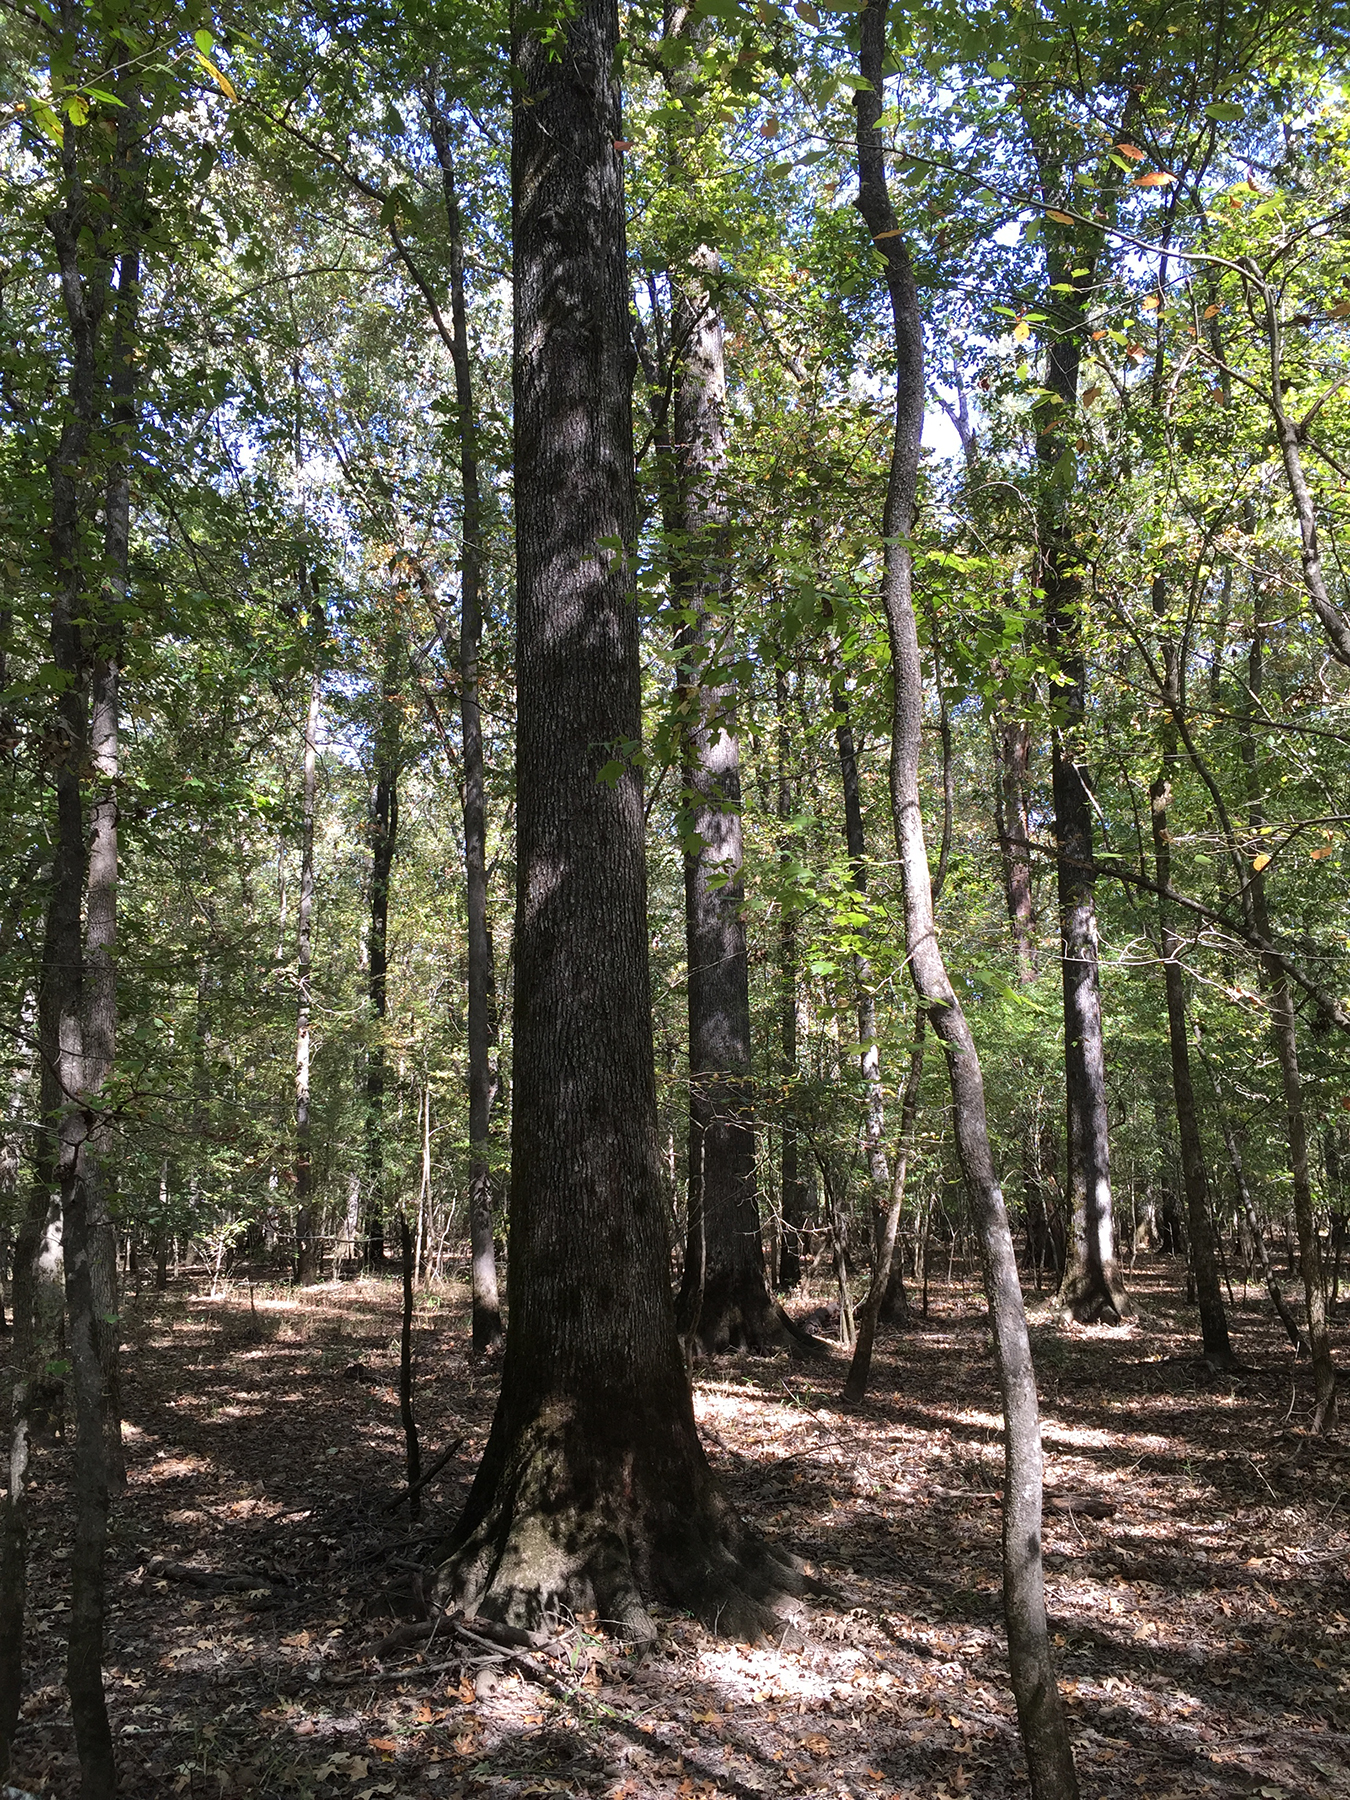 A straight cherrybark oak tree with no lower branches, surrounded by other cherrybark oaks.